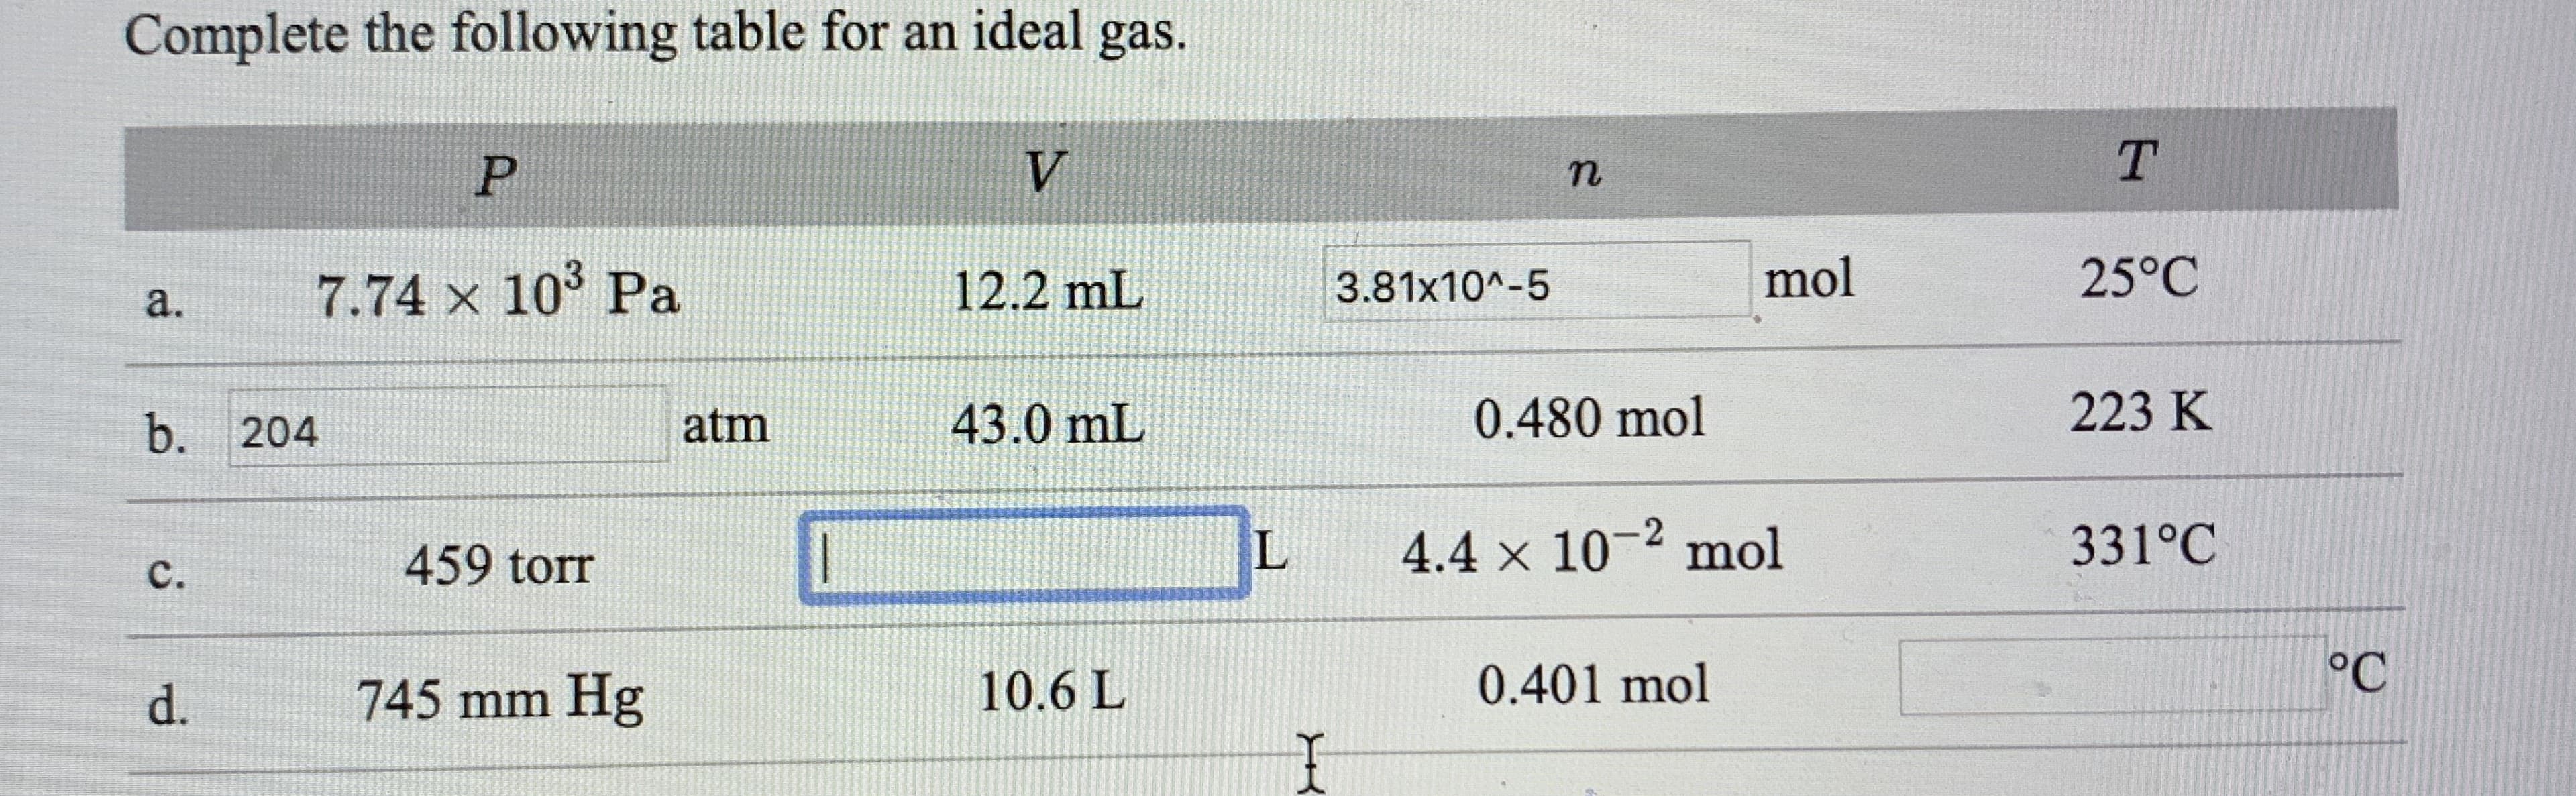 Complete the following table for an ideal gas.
7.74 x 10° Pa
12.2 mL
mol
25°C
3.81x10^-5
a.
b. 204
atm
43.0 mL
0.480 mol
223 K
459 torr
4.4 x 10-2 mol
331°C
C.
d.
745 mm Hg
10.6 L
0.401 mol
°C
